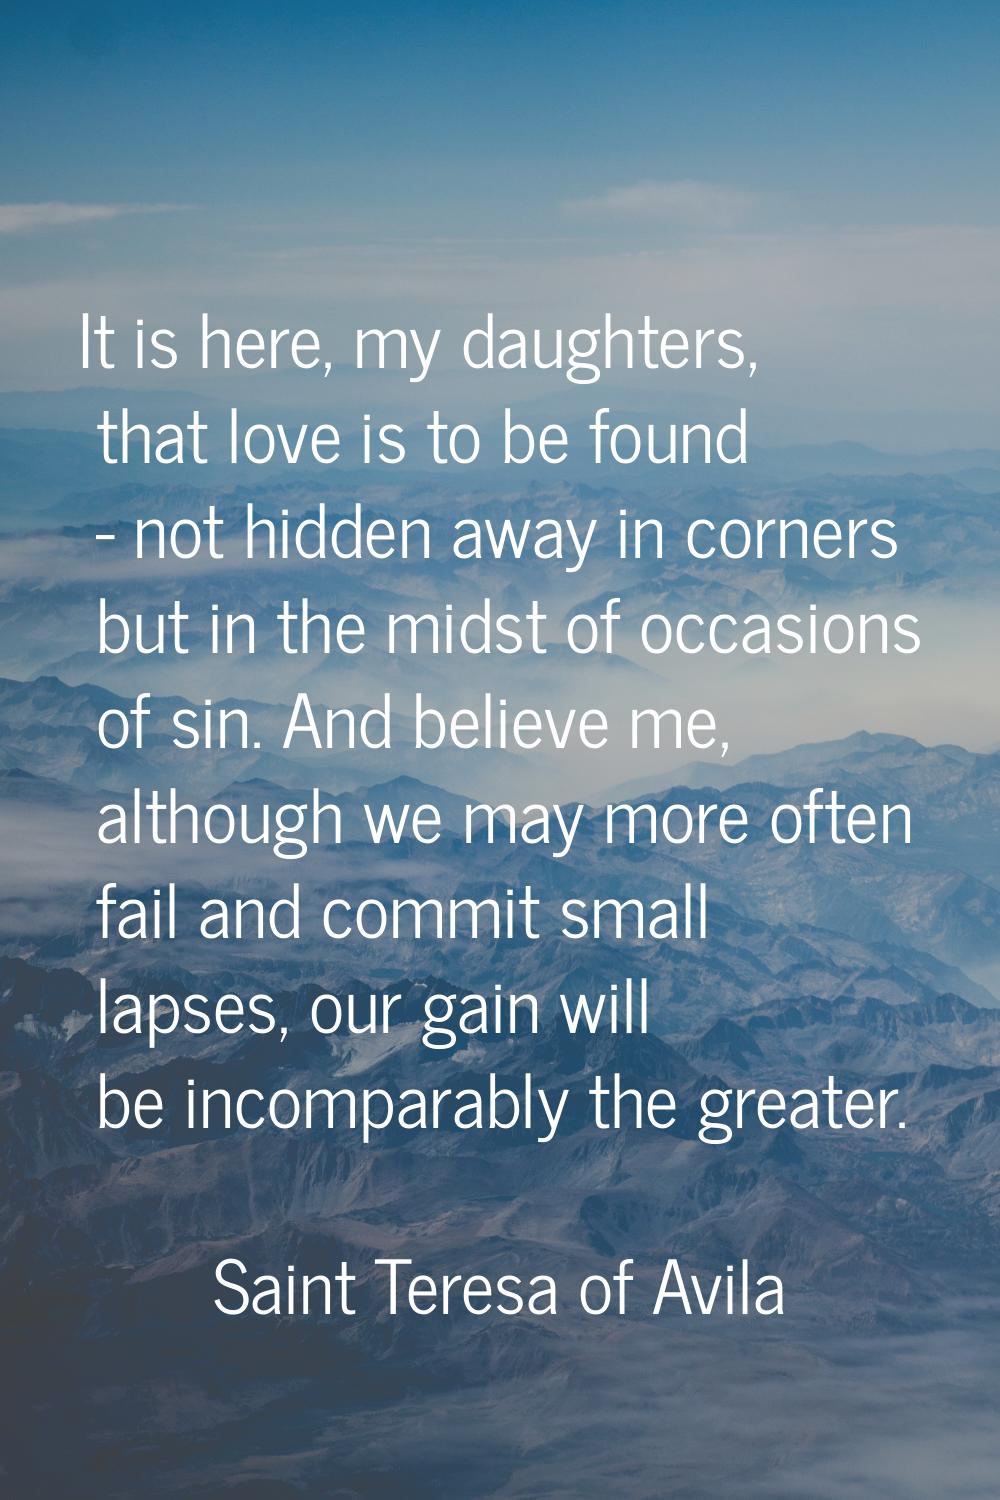 It is here, my daughters, that love is to be found - not hidden away in corners but in the midst of